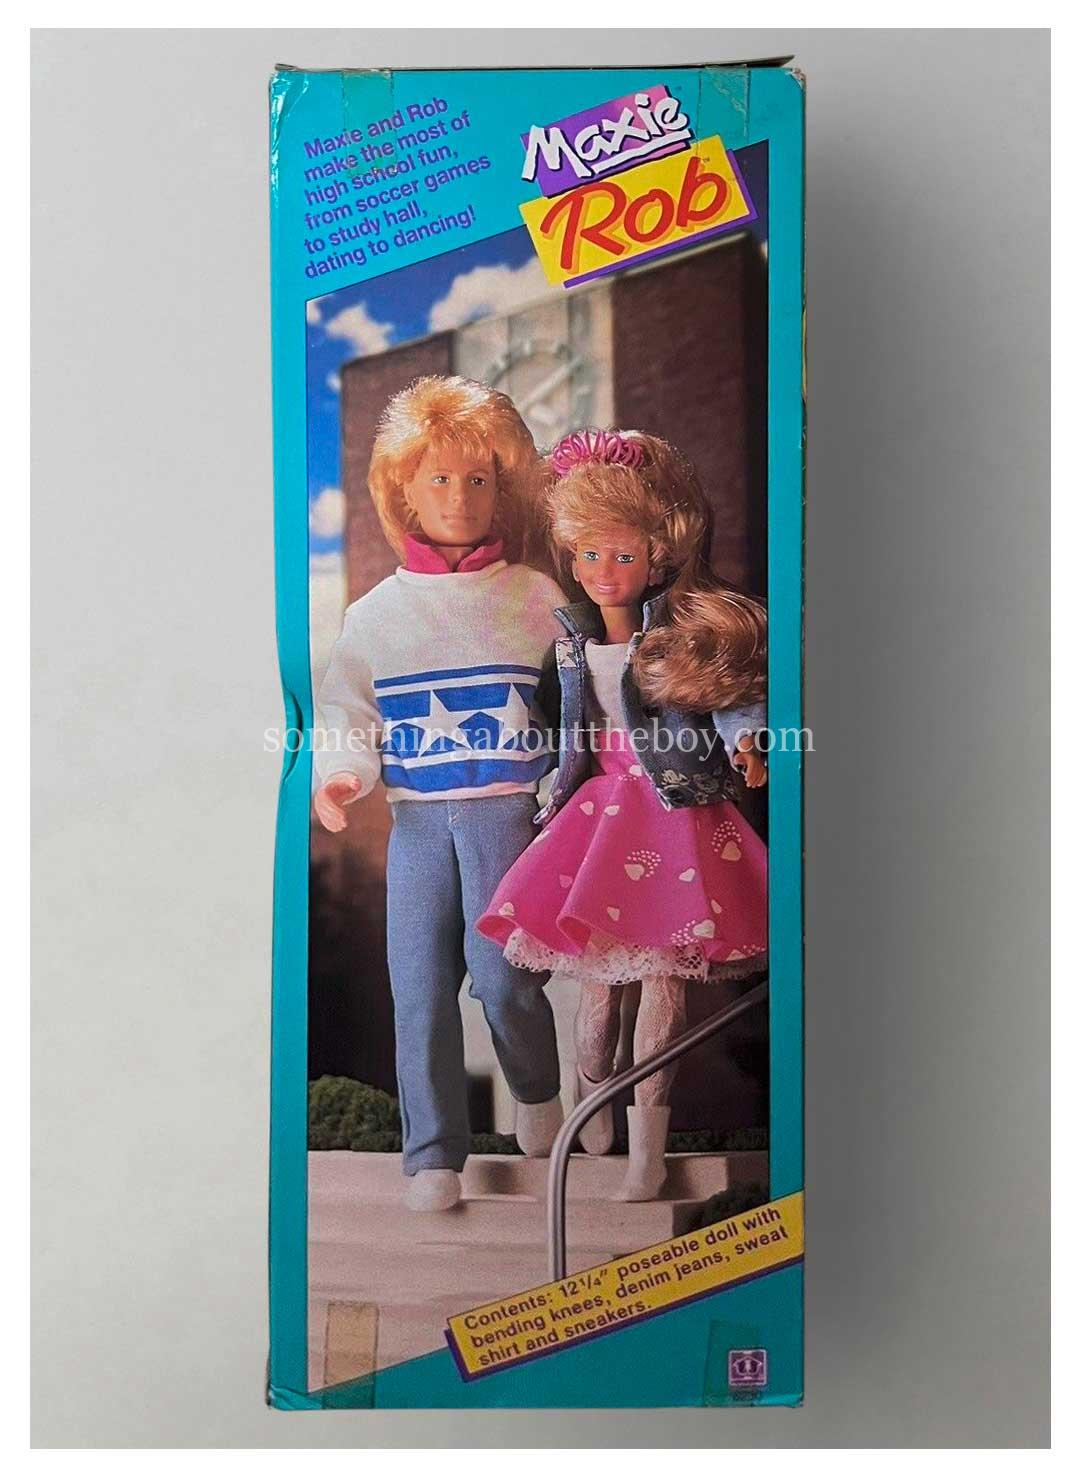 1987 #8230 Rob by Hasbro reverse of packaging